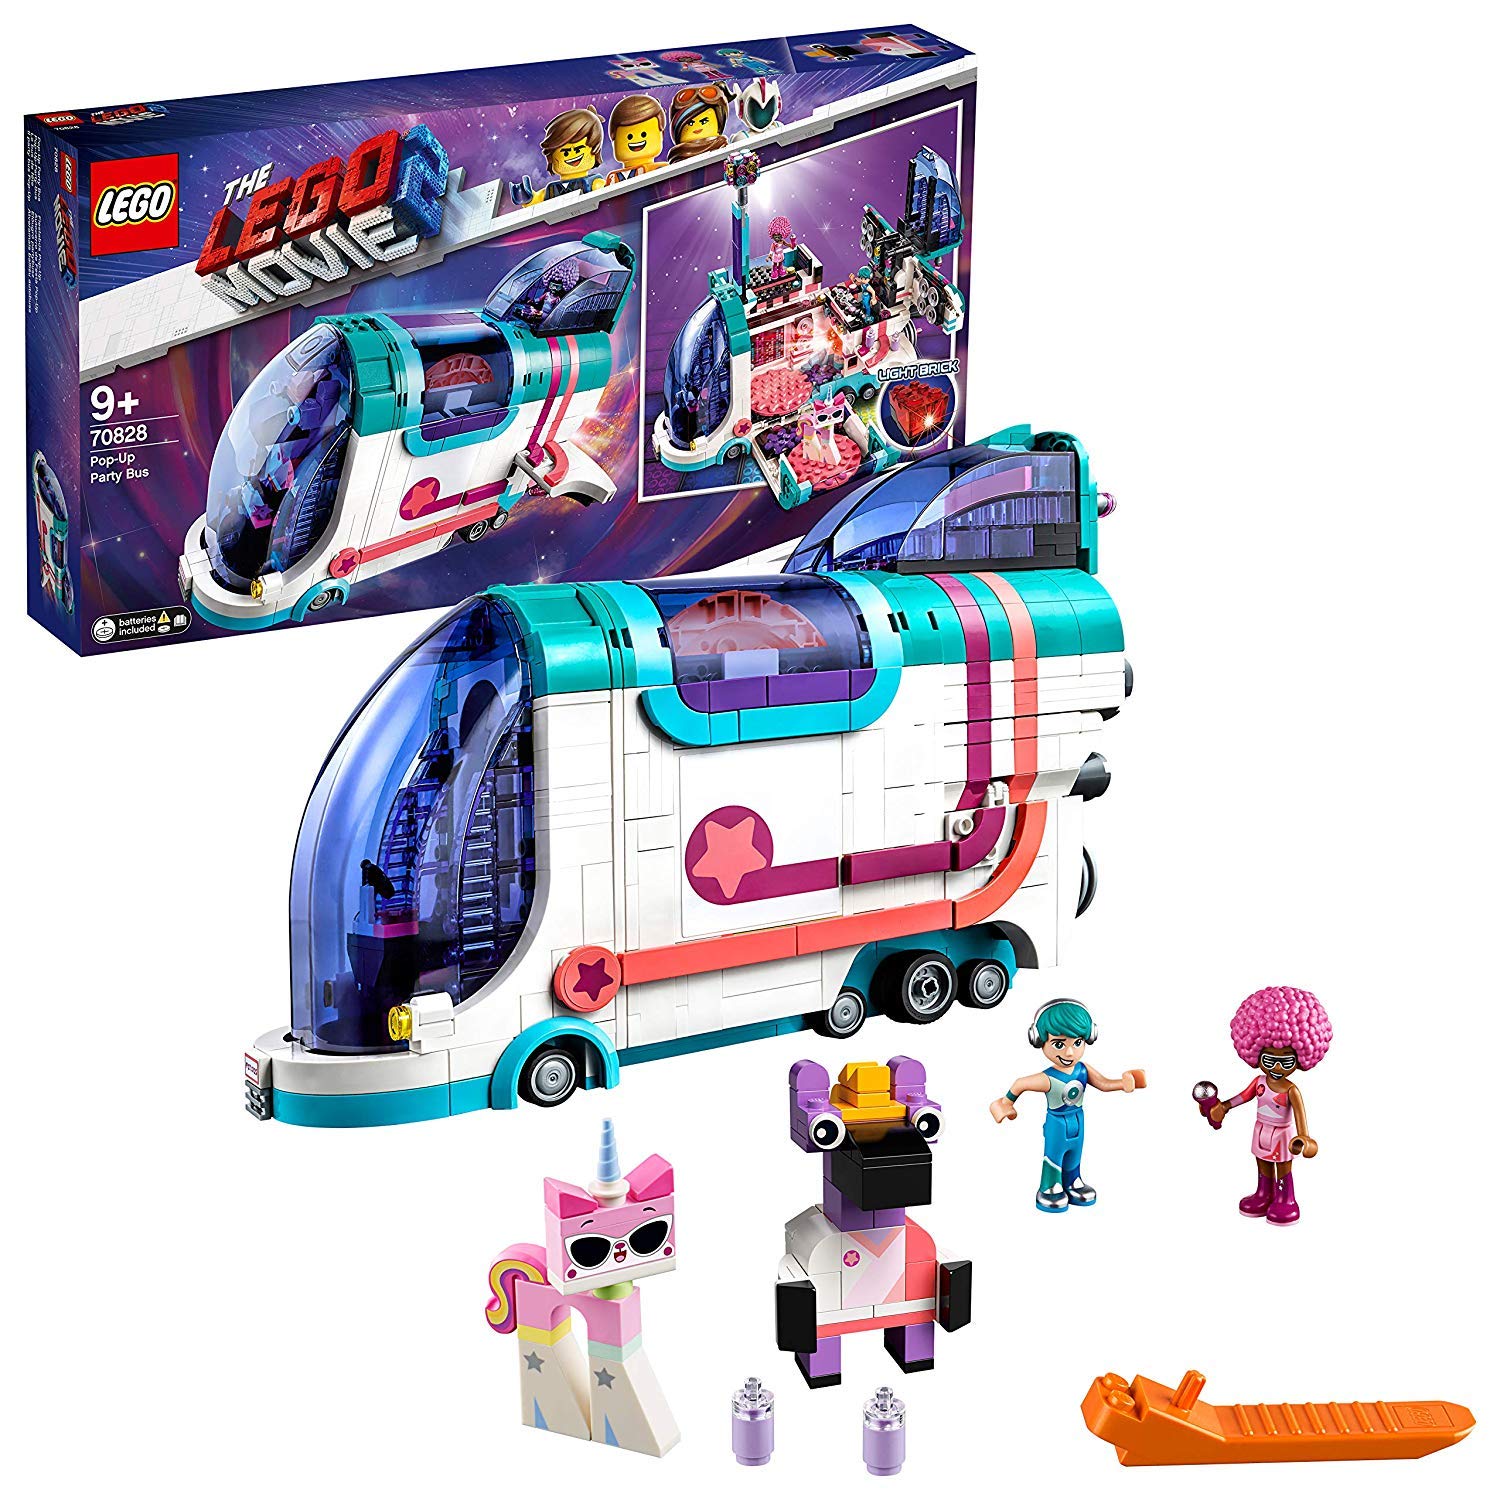 The Lego Movie 2 70828 Pop-Up Party Bus